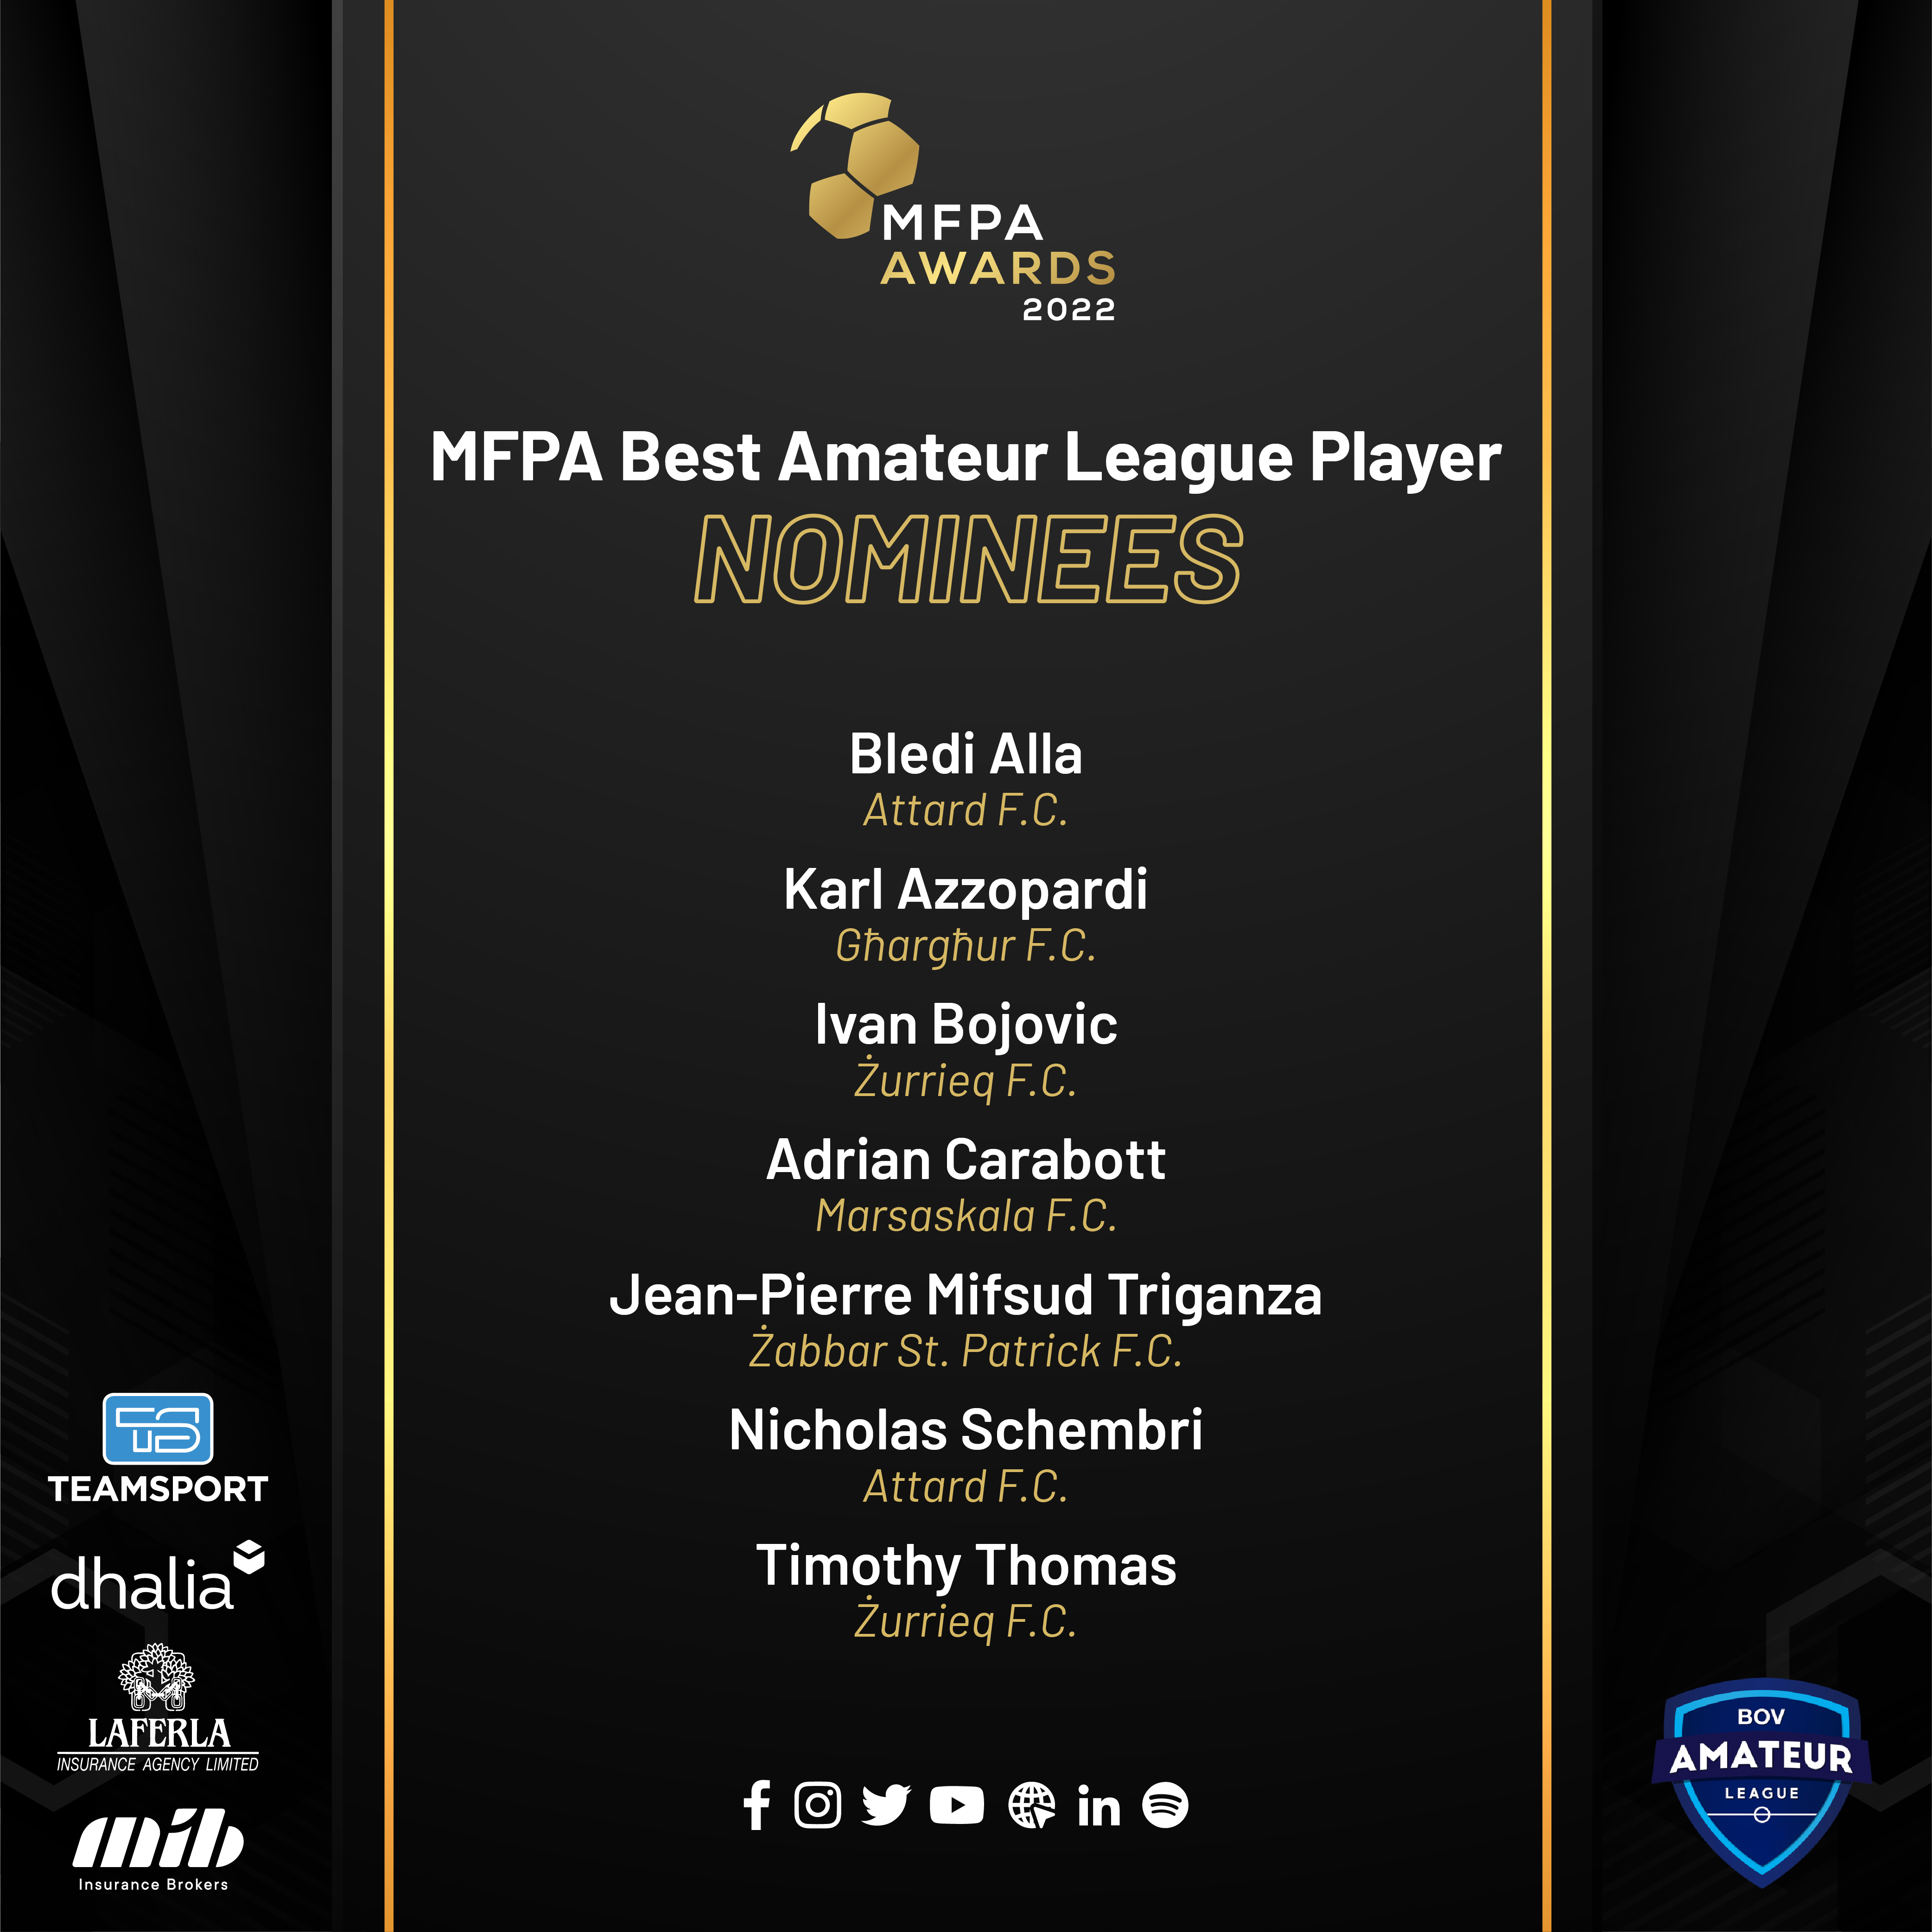 Vote for the MFPA Best Amateur League Player